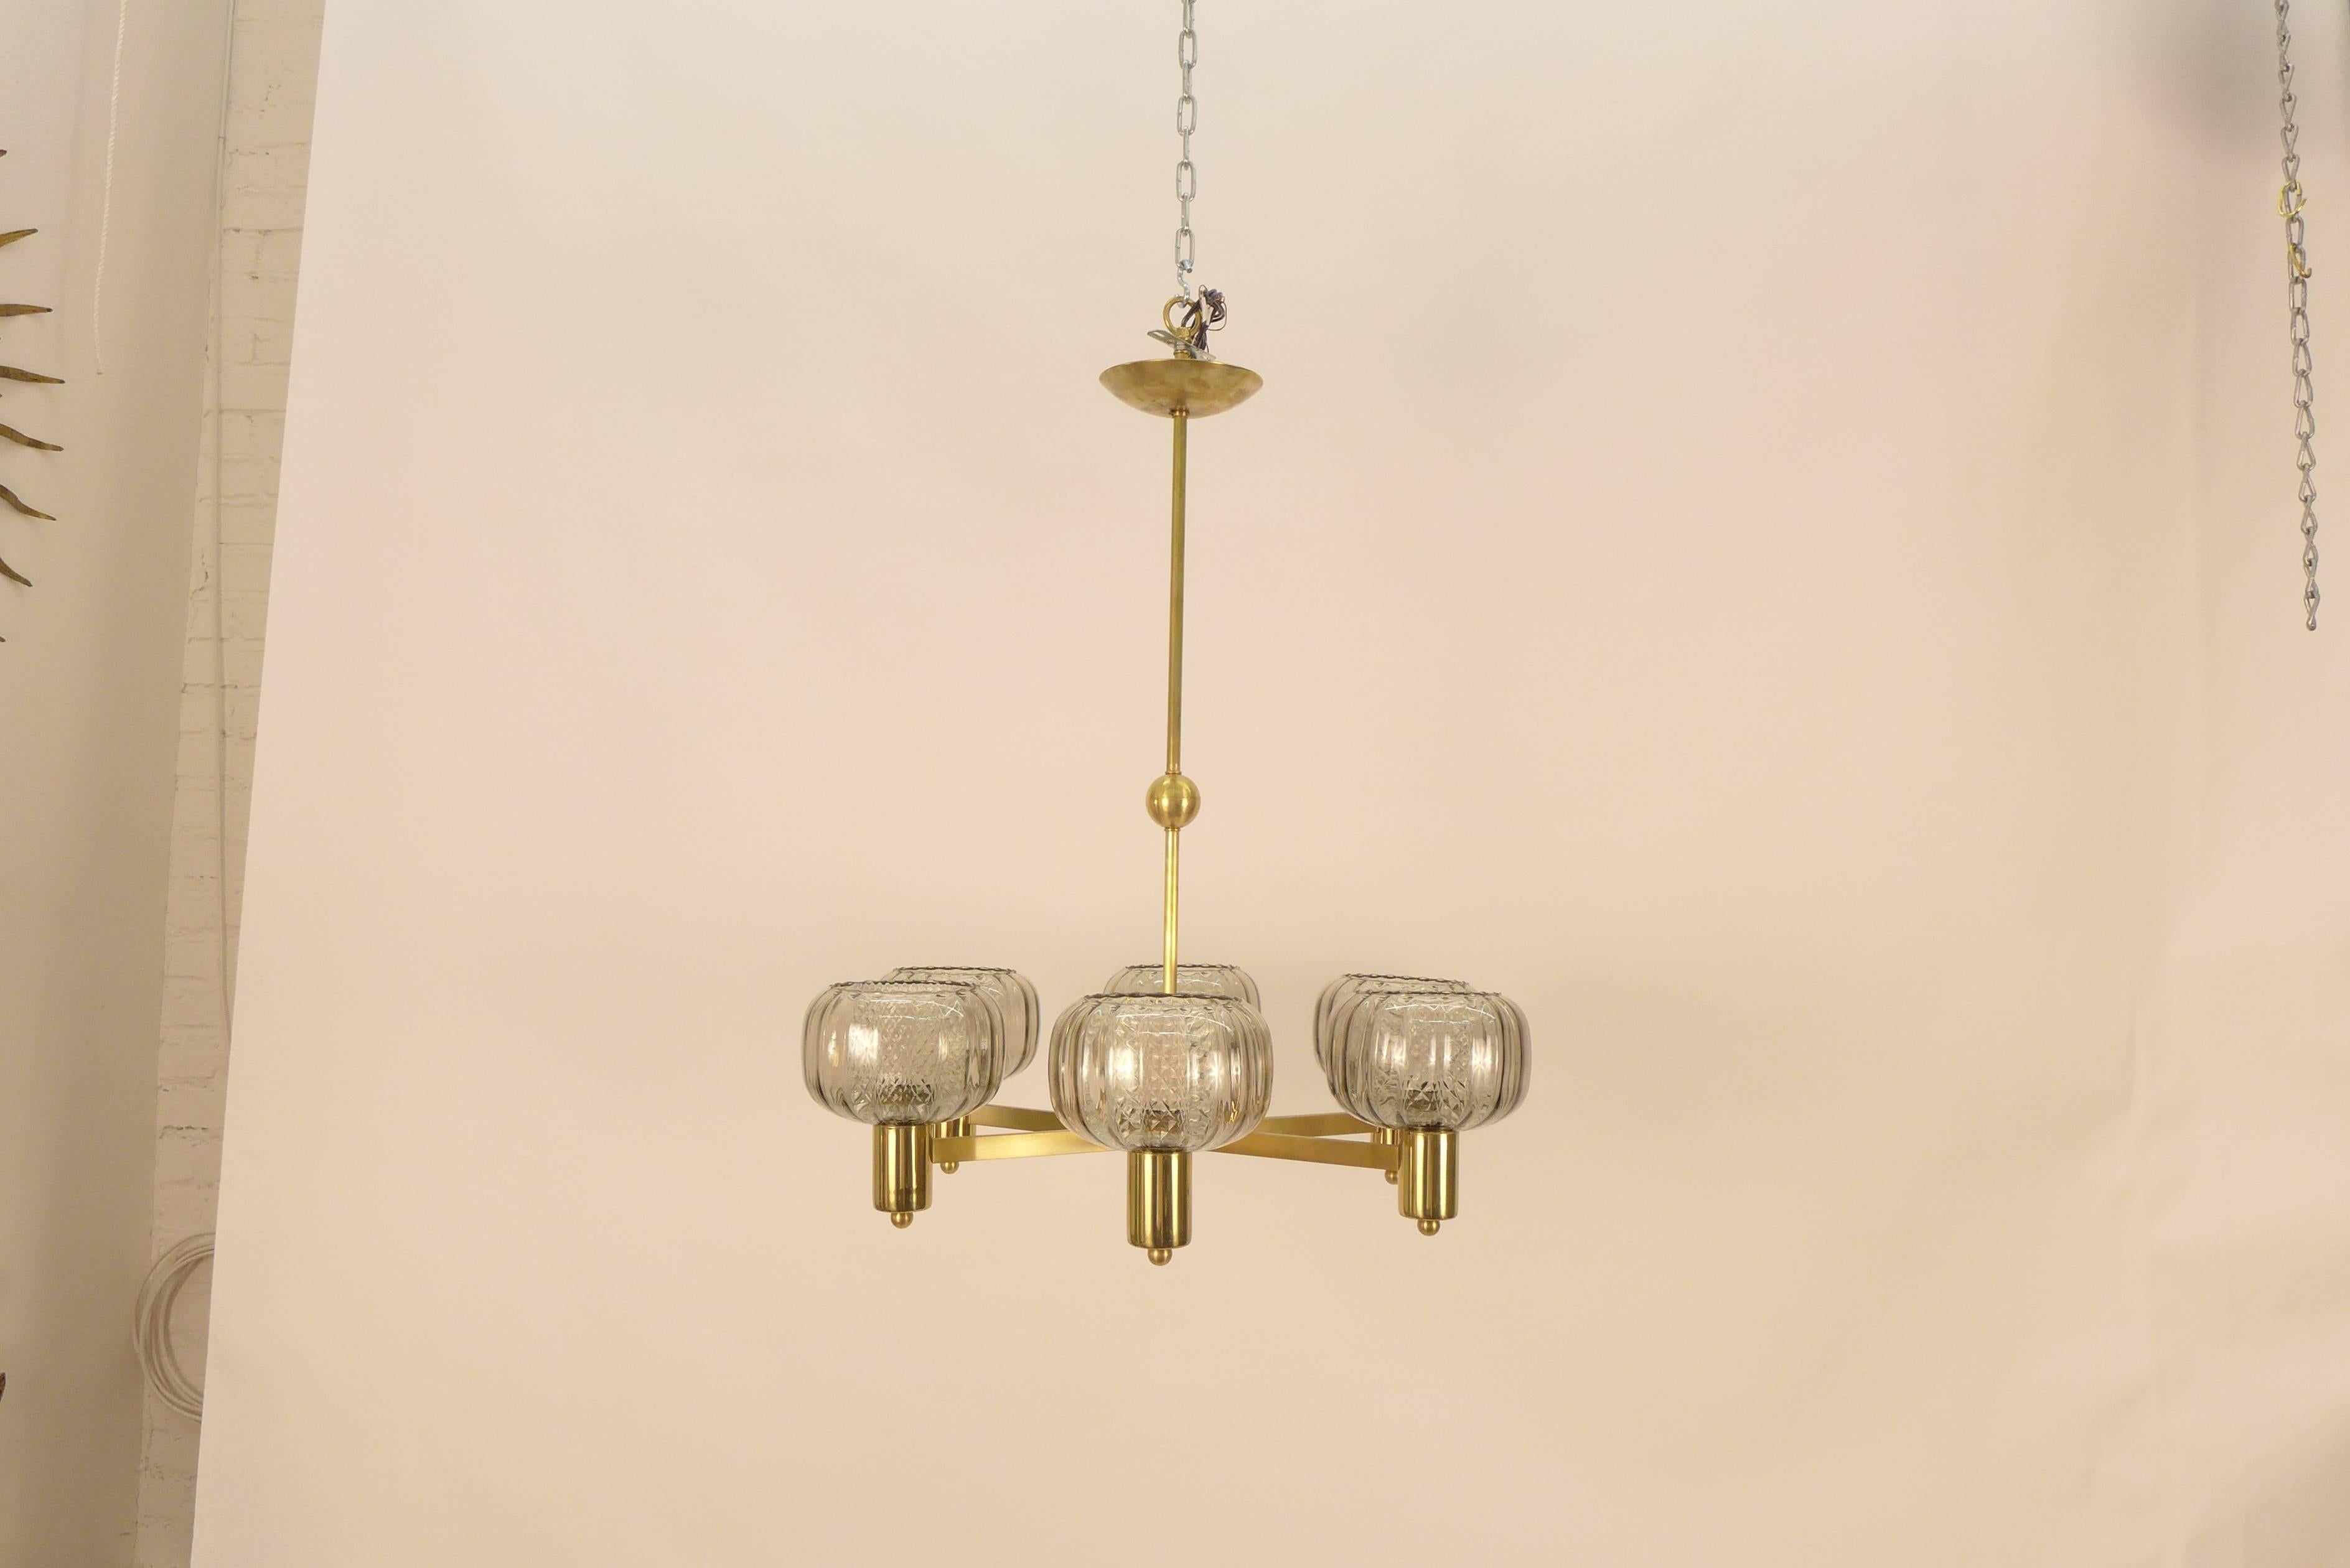 Brass and Smoke Glass German Chandelier 1970's In Good Condition For Sale In Tarrytown, NY